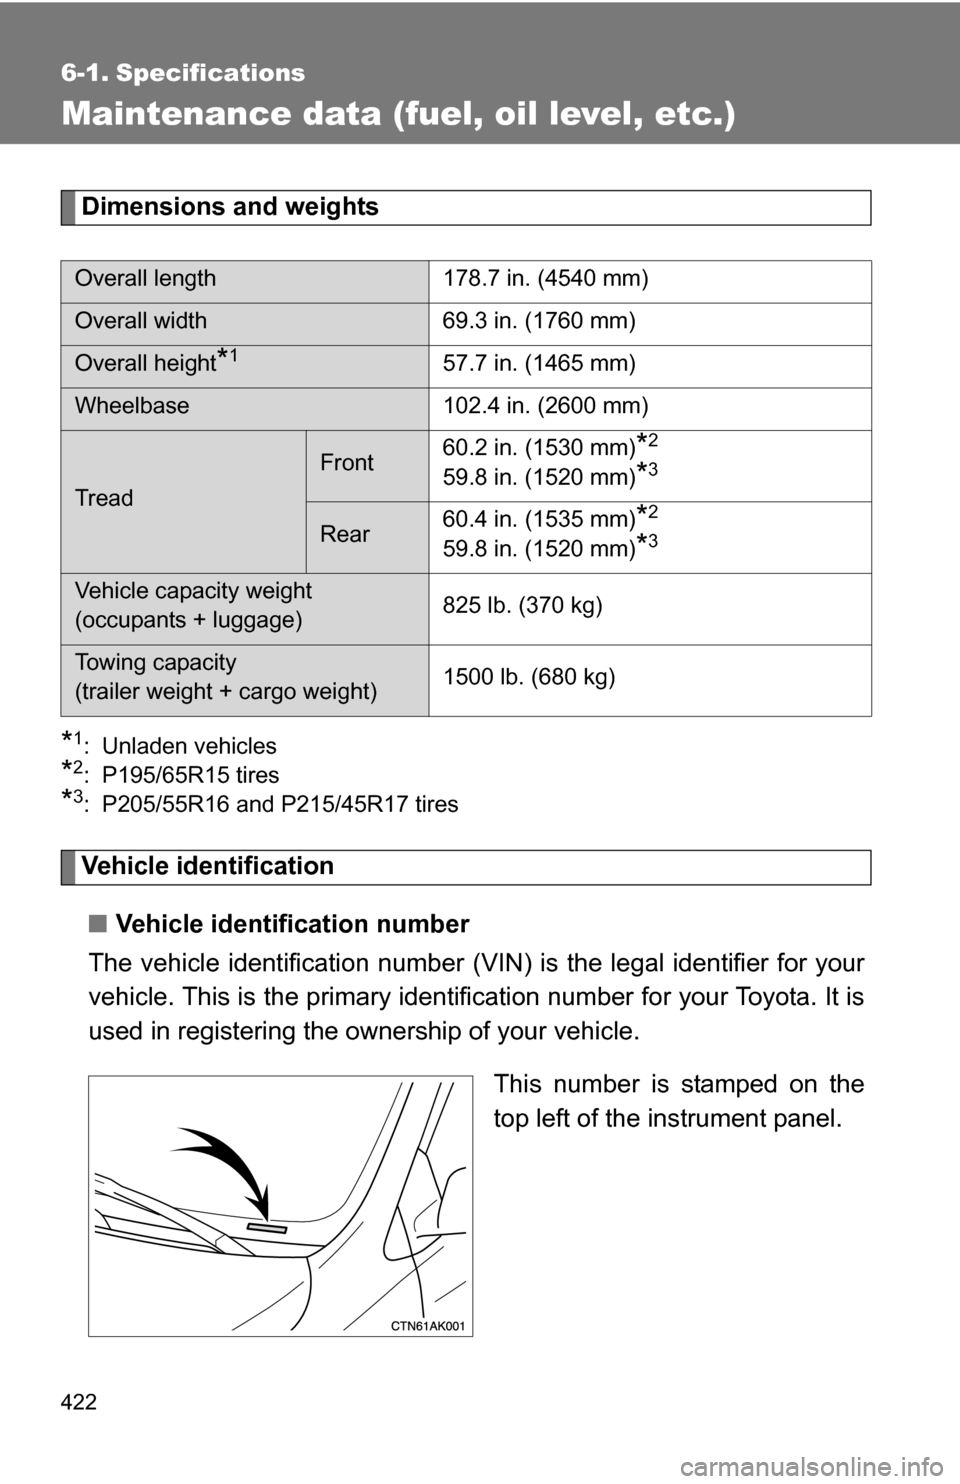 TOYOTA COROLLA 2010 10.G Owners Manual 422
6-1. Specifications
Maintenance data (fuel, oil level, etc.)
Dimensions and weights
*1: Unladen vehicles
*2: P195/65R15 tires
*3: P205/55R16 and P215/45R17 tires
Vehicle identification■ Vehicle 